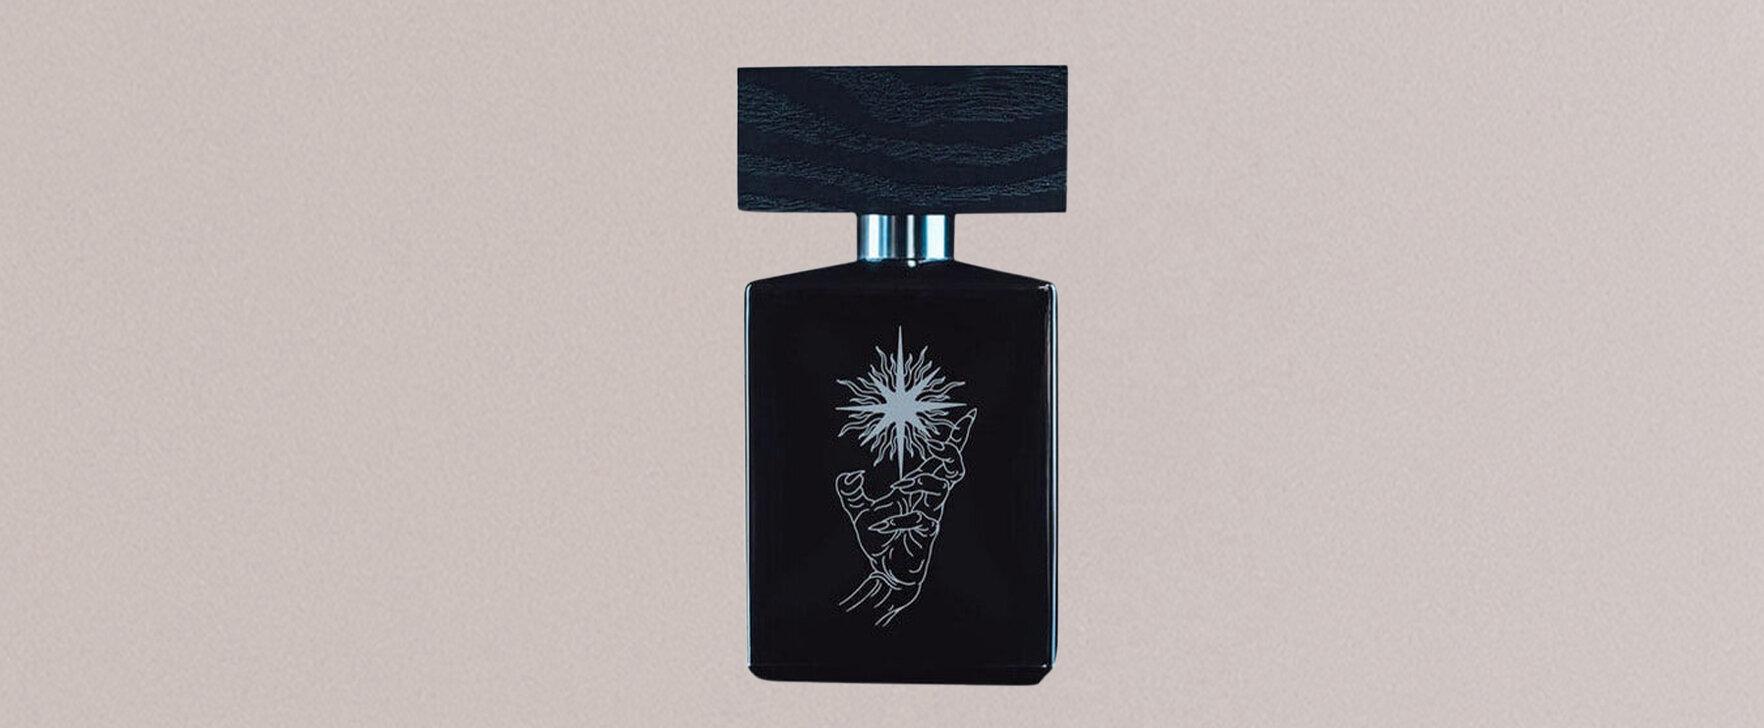 The New Unisex Fragrance "Absent Presence" by Beaufort - Inspired by Poetry